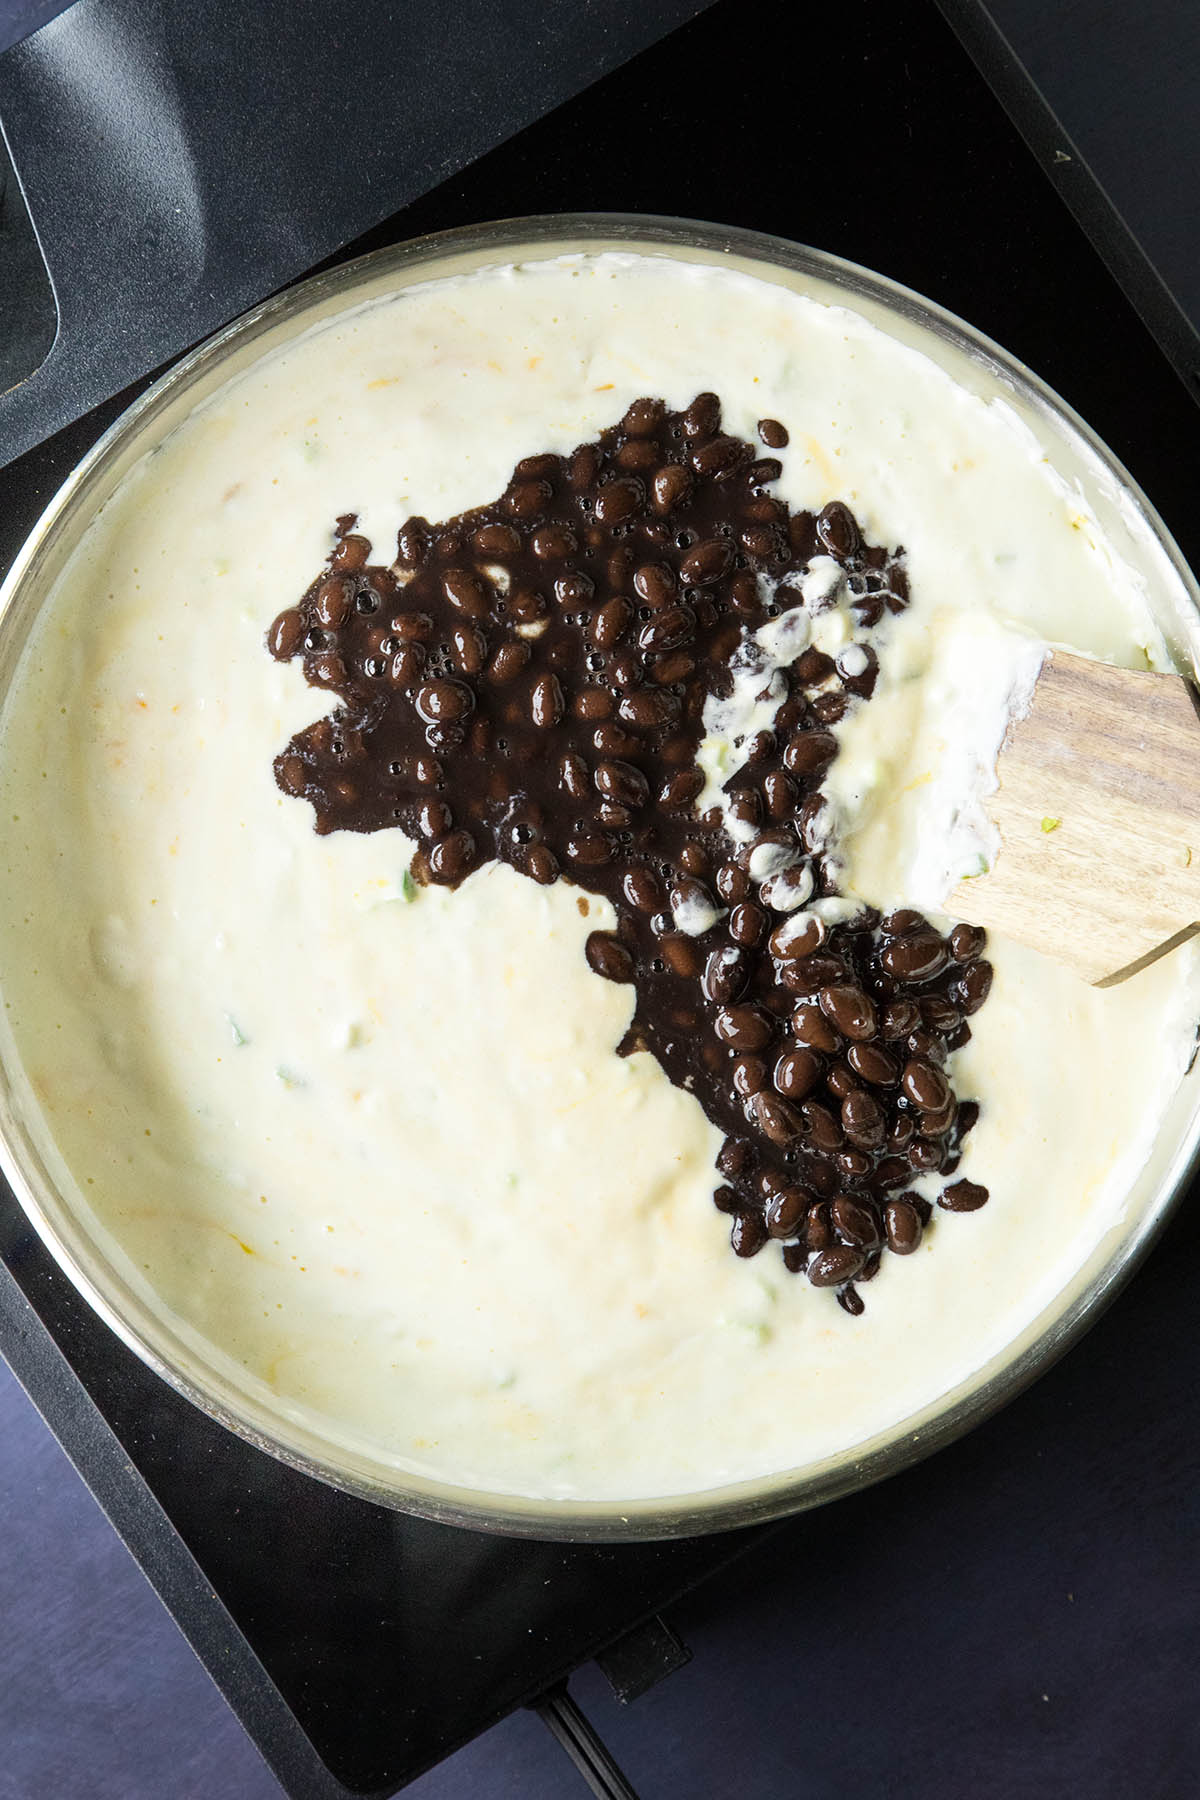 Southwest Style Cheese Dip Recipe